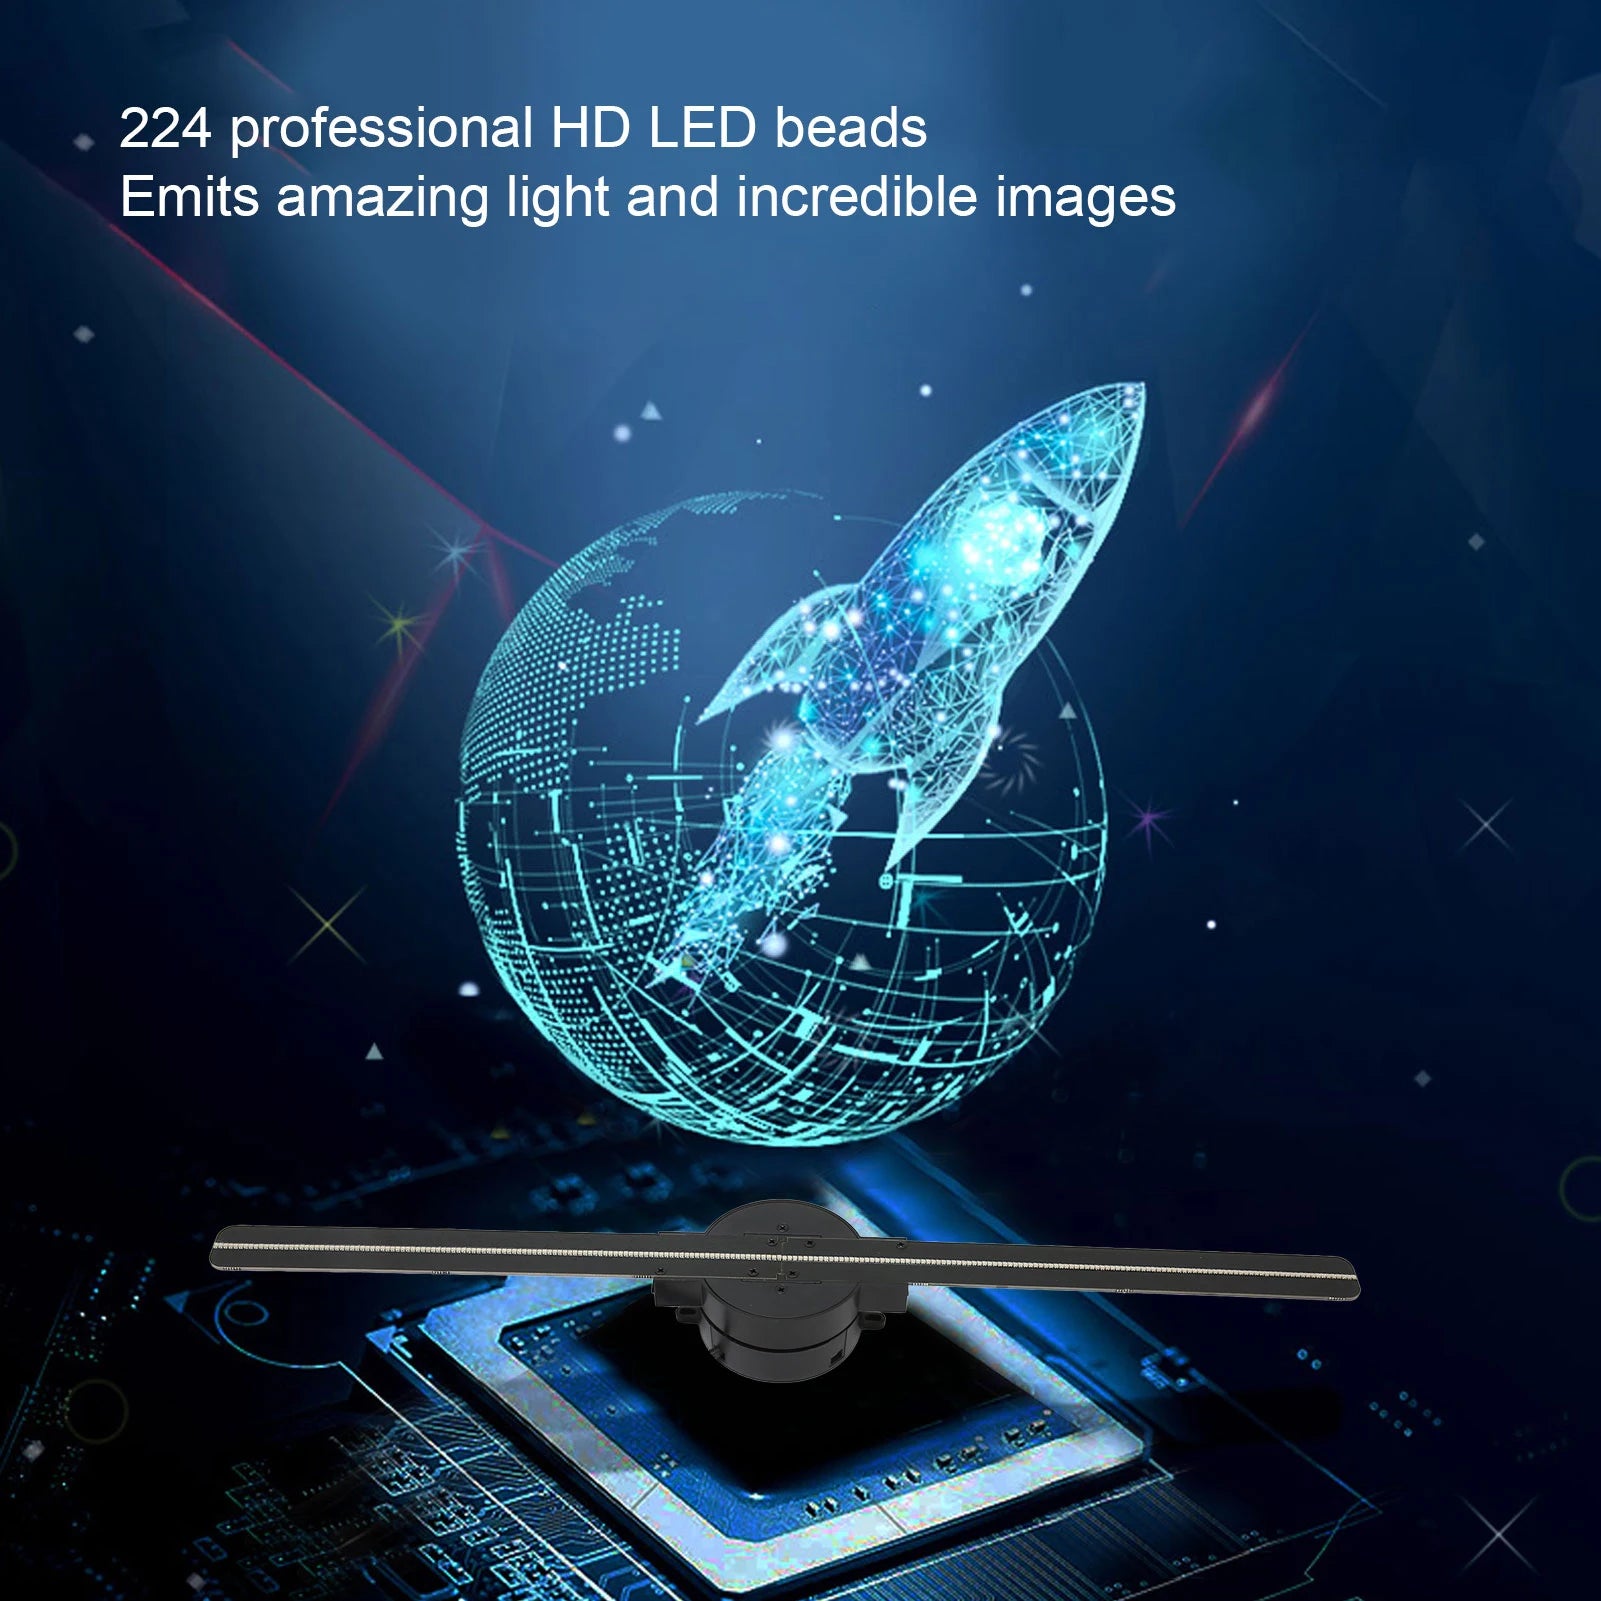 16.5In 3D Hologram Fan 2000X224 Wifi 3D Projector with 224 LED Light Beads for Business Store Advertising 100‑240V